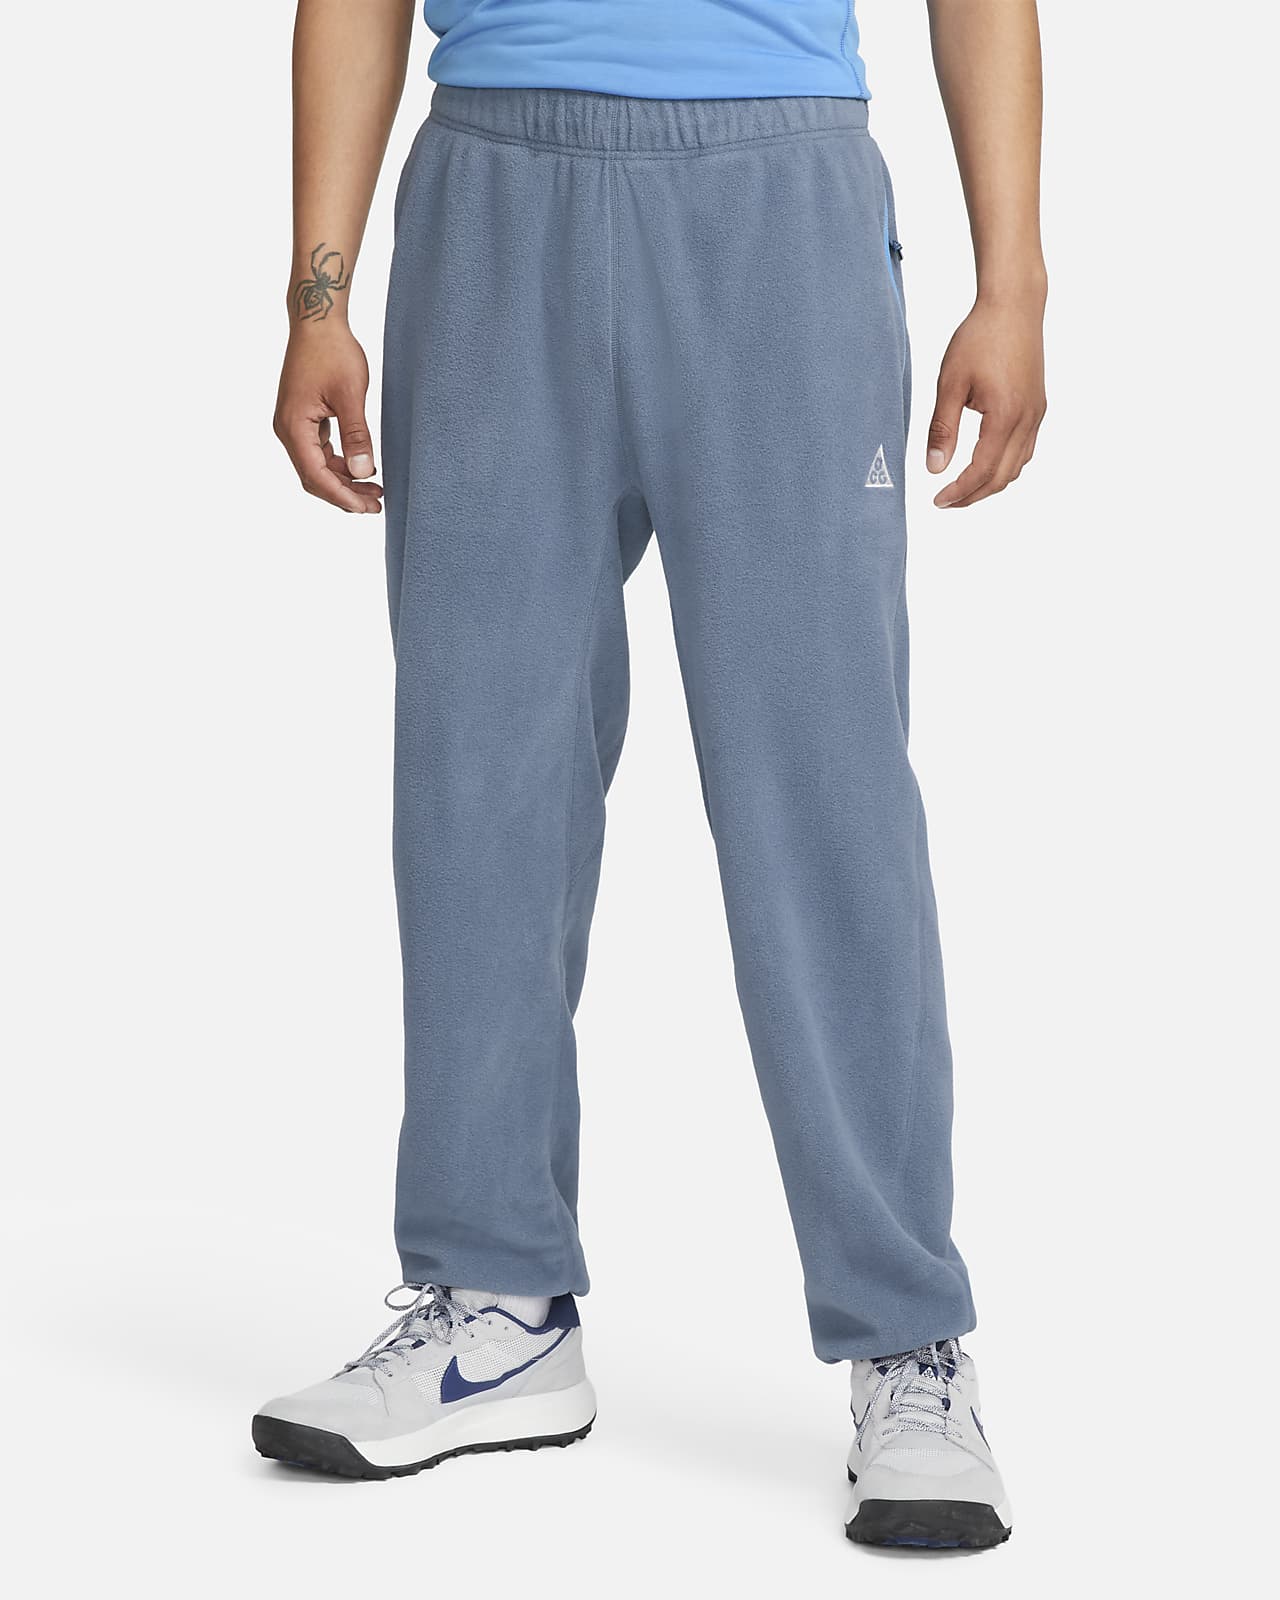 Shop Girls Track Pants Online - FREE* Shipping & Easy Returns